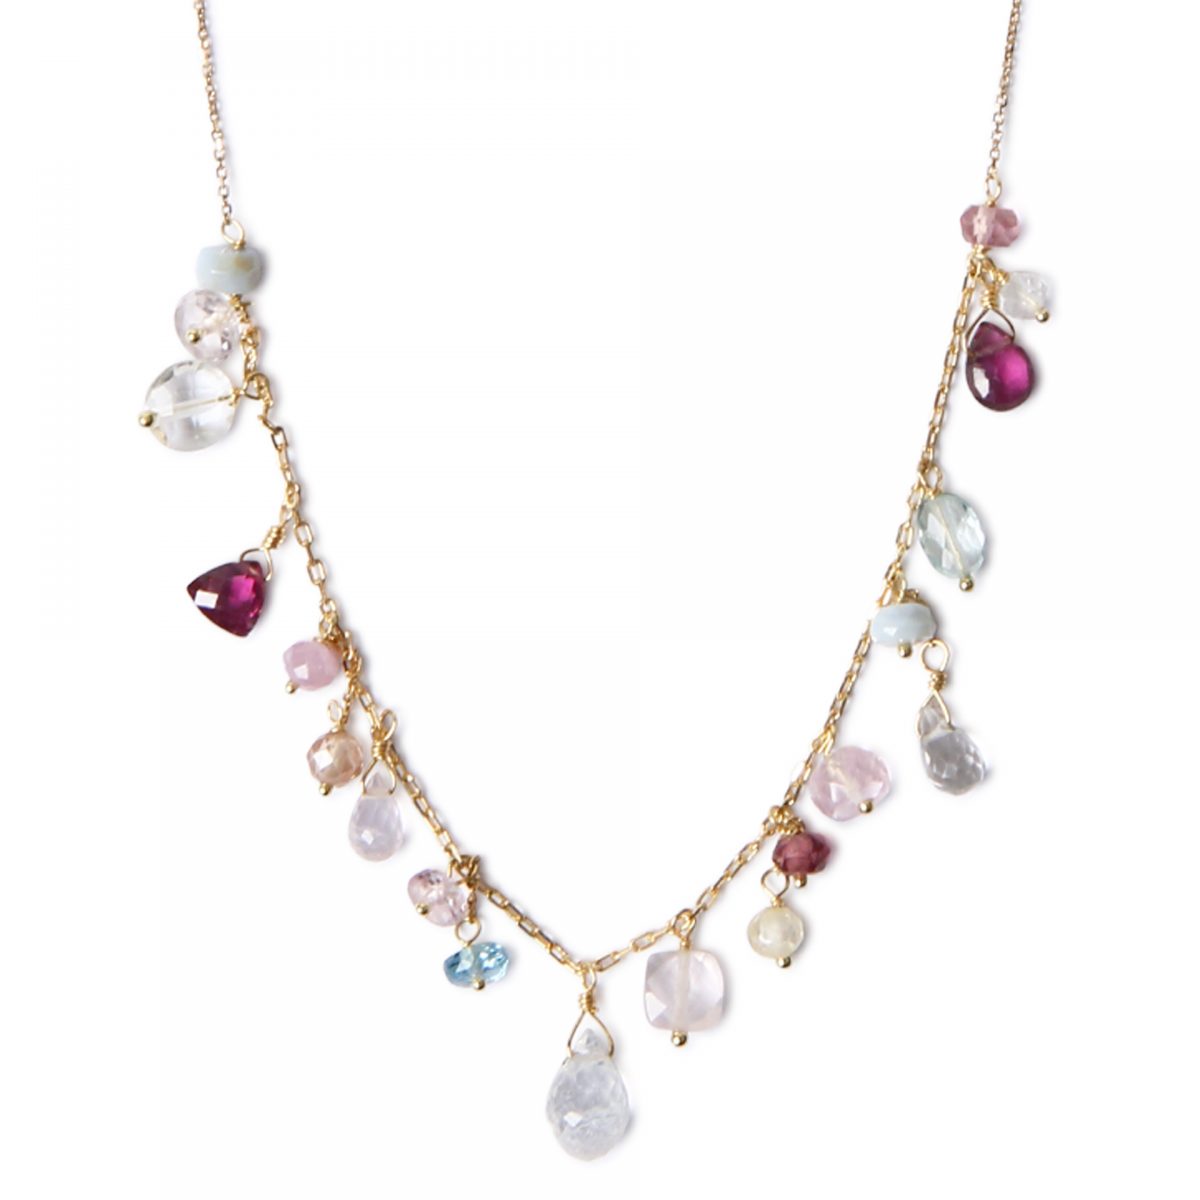 swp_necklace_19_241